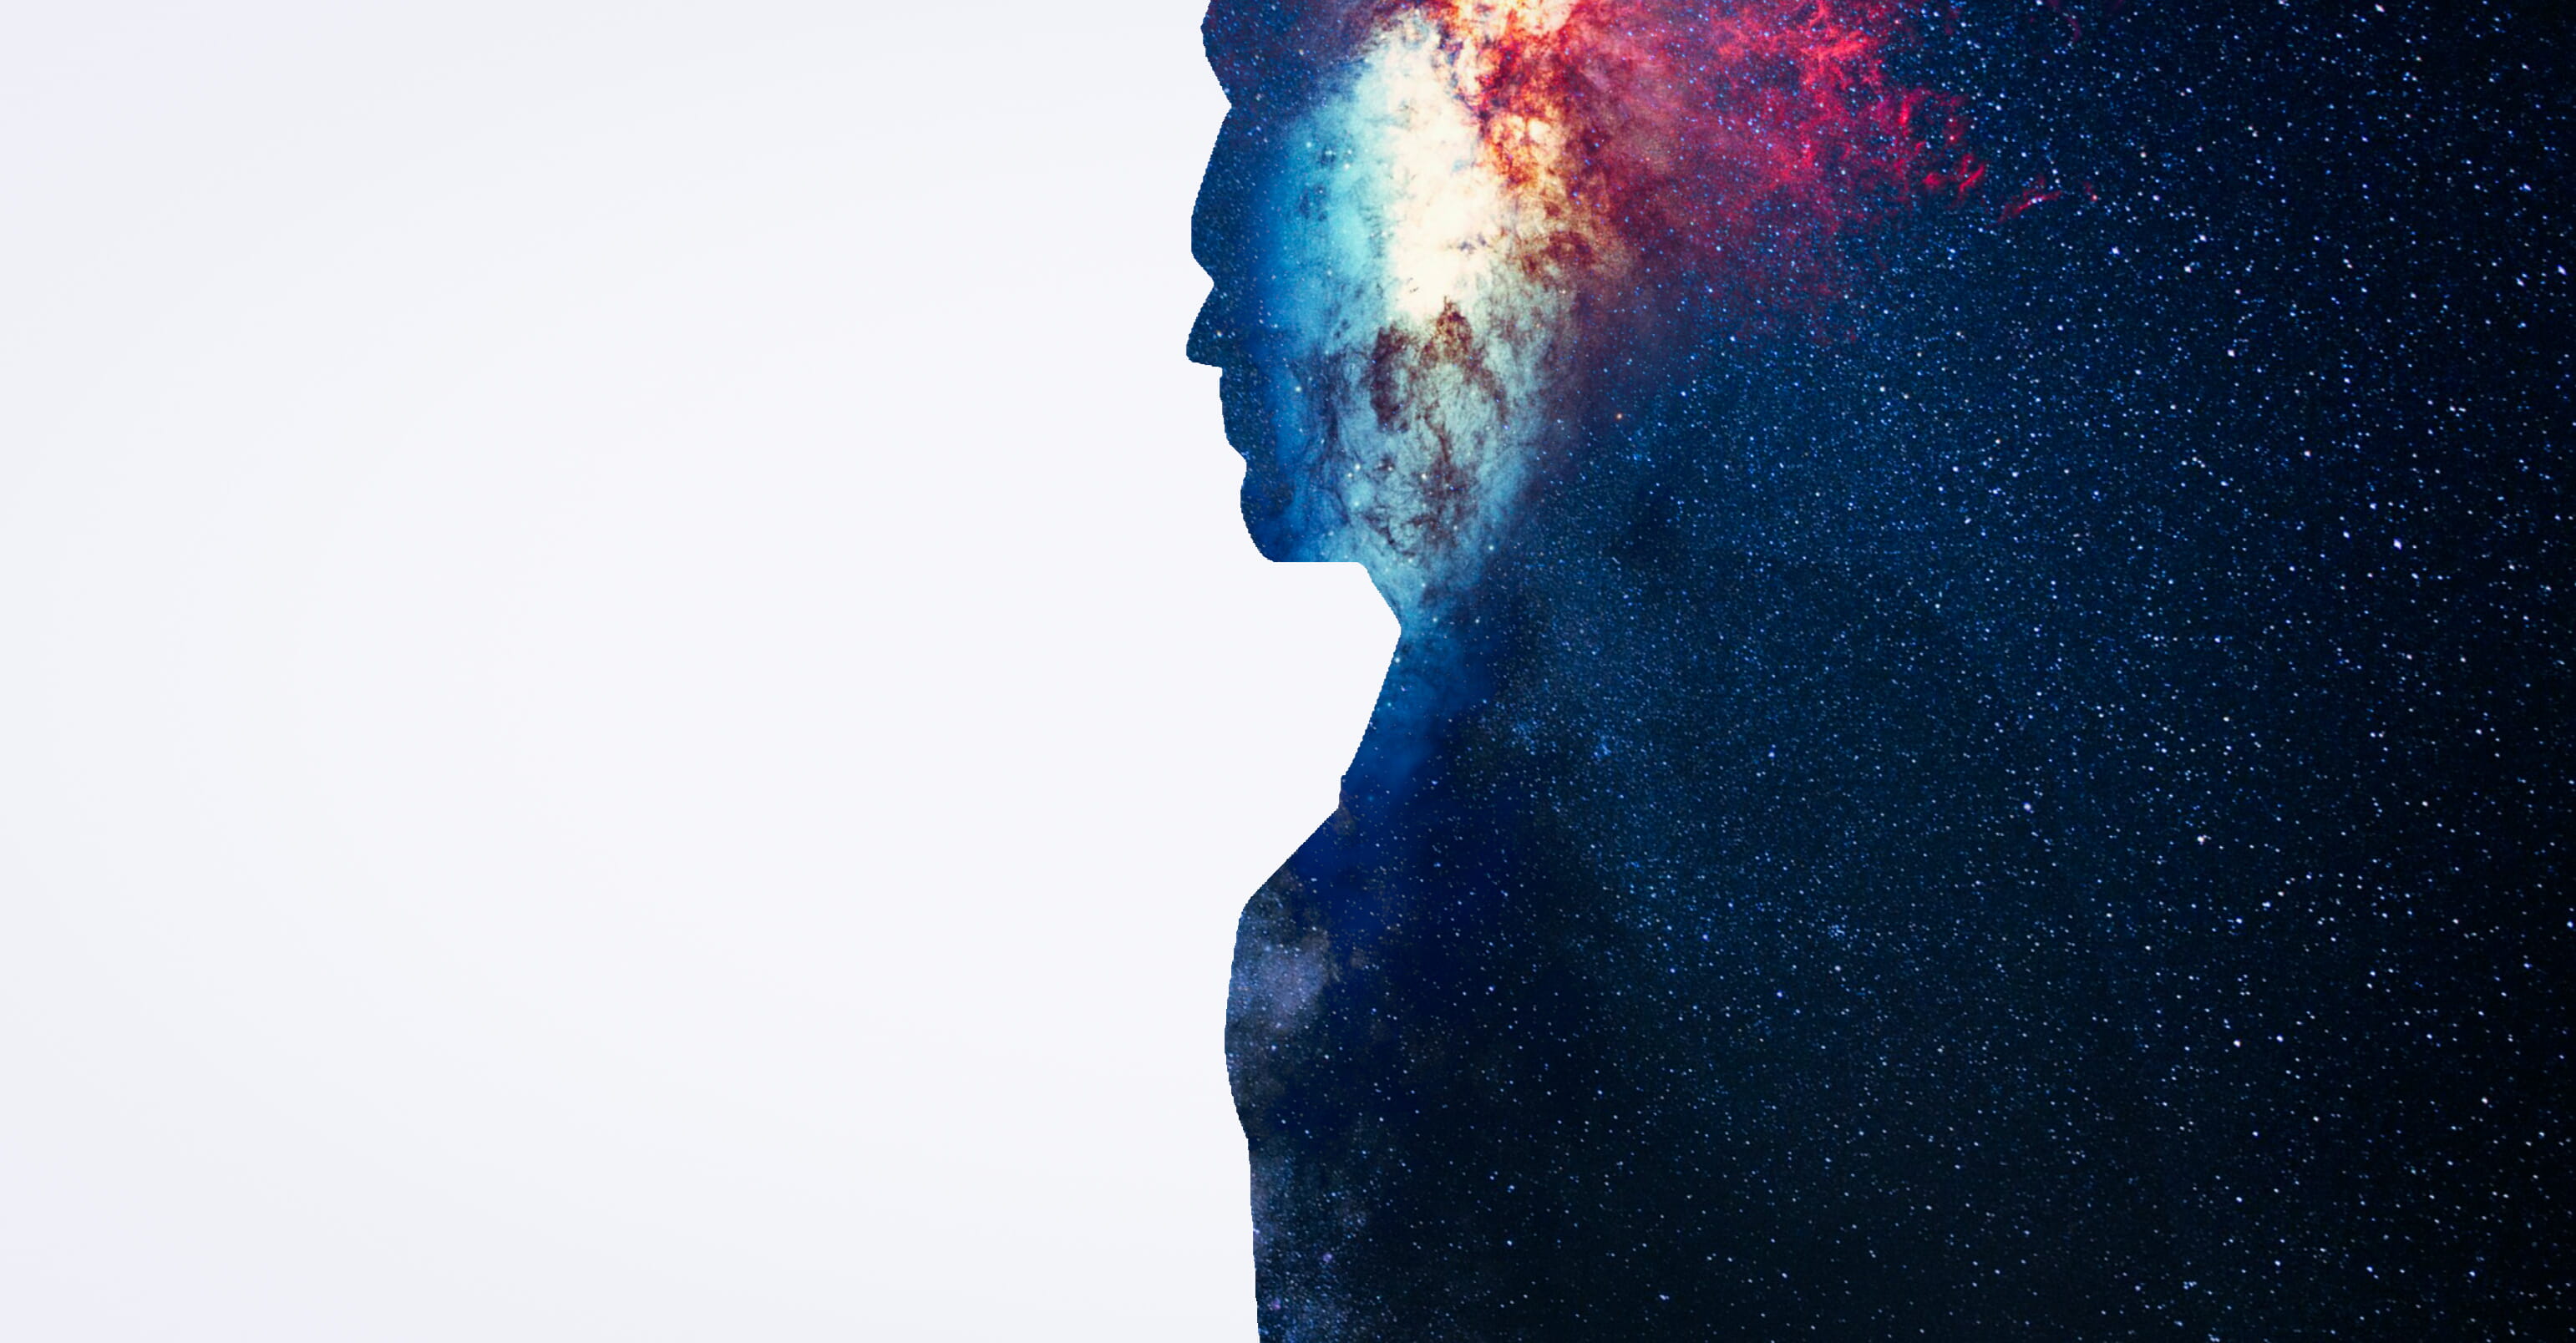 Silhouette of person with space scene., psychology, brain, memory